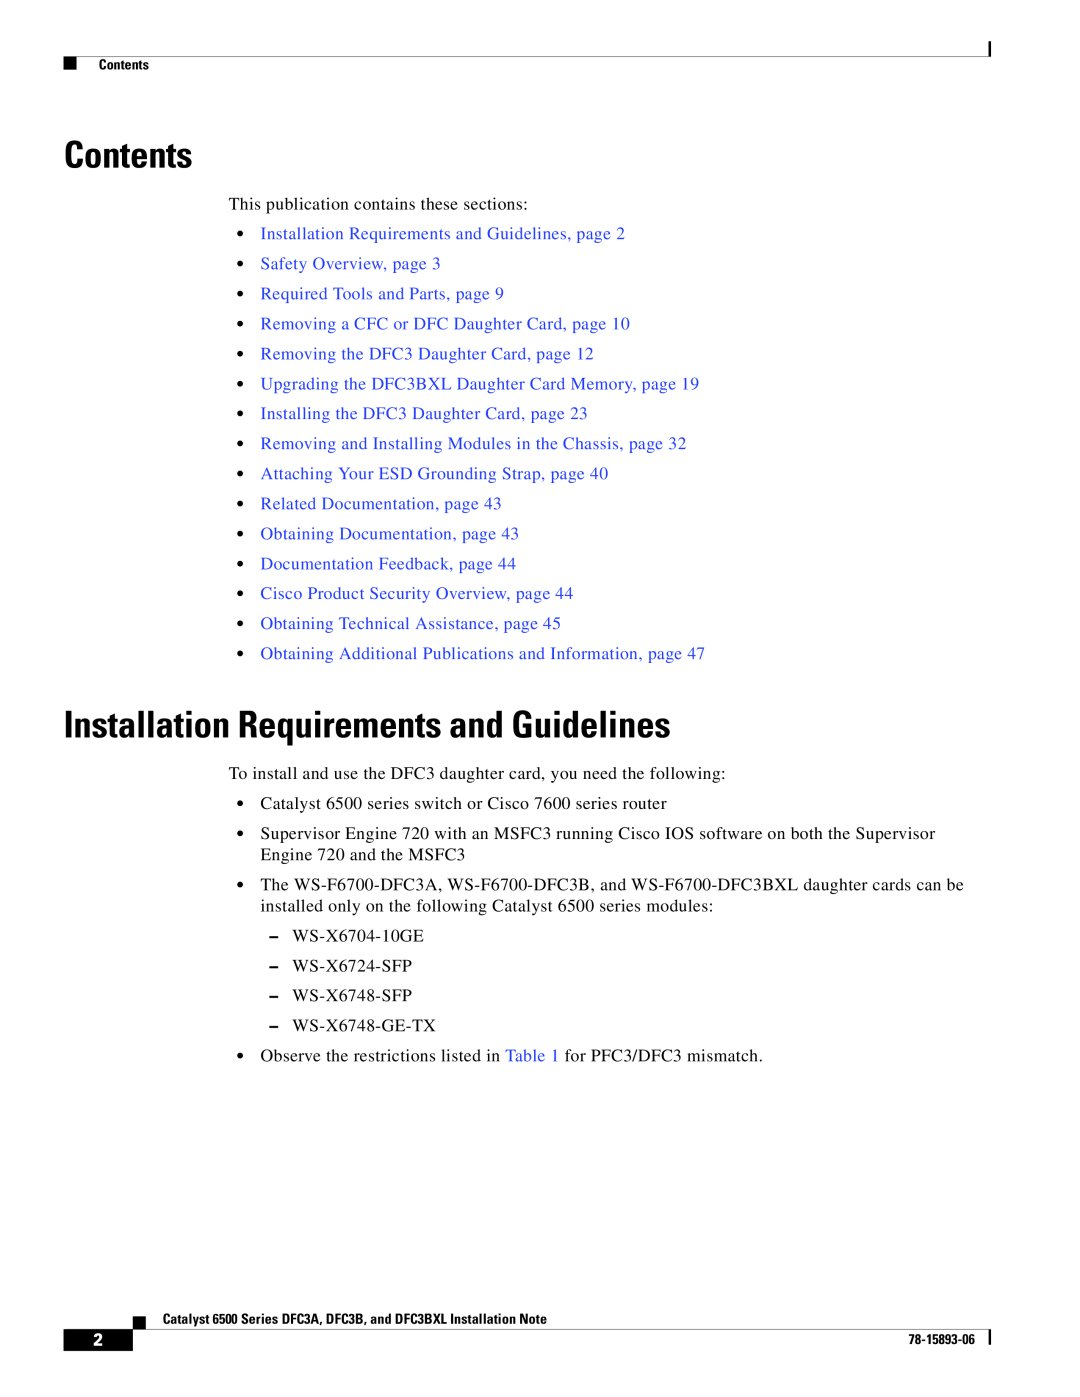 Cisco Systems DFC3A, DFC3BXL manual Contents, Installation Requirements and Guidelines 